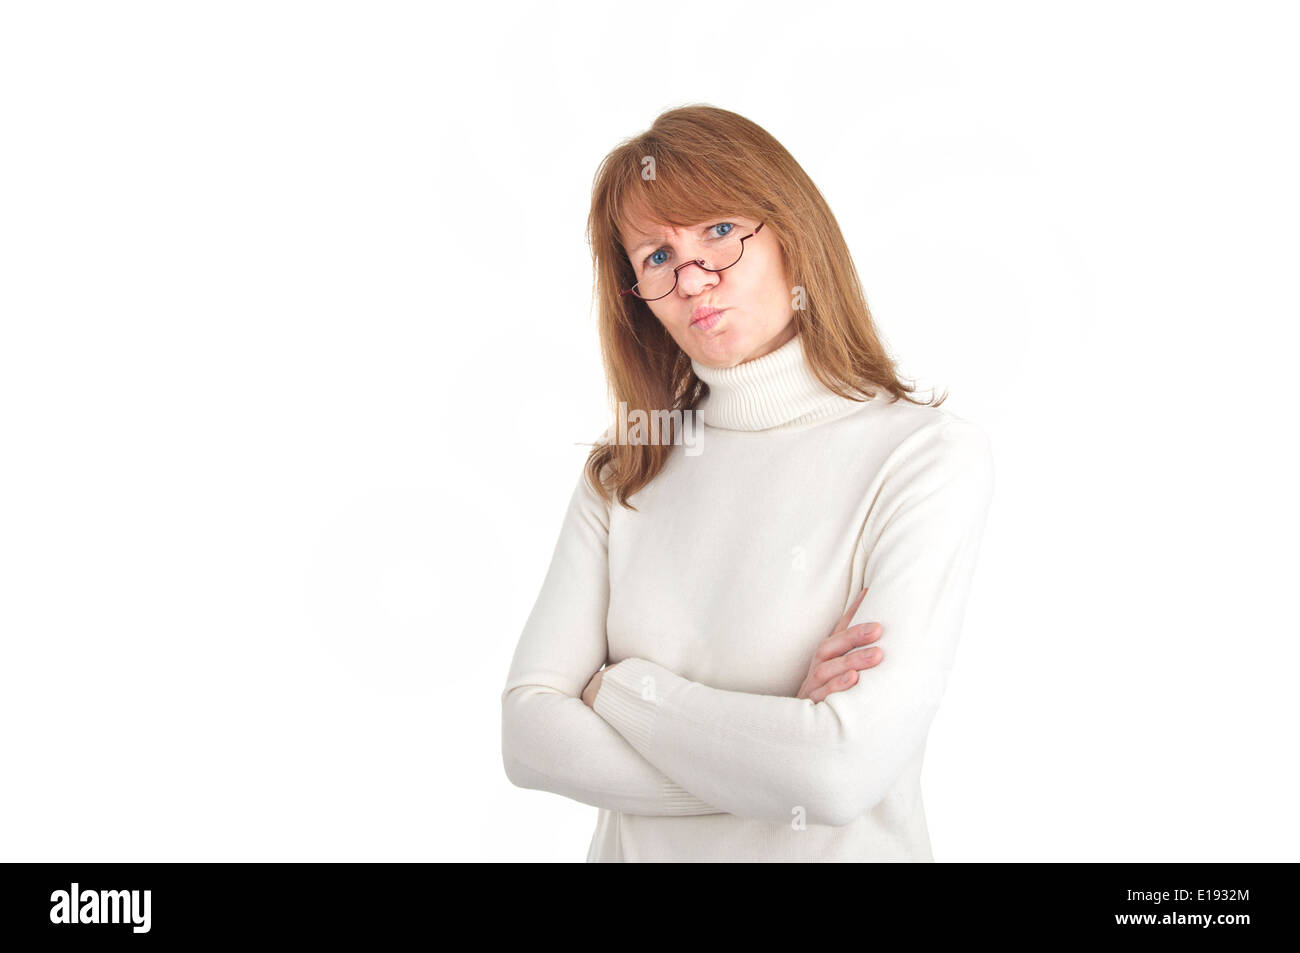 Woman with reading glasses looking doubtfully into the camera - isolated over white Stock Photo